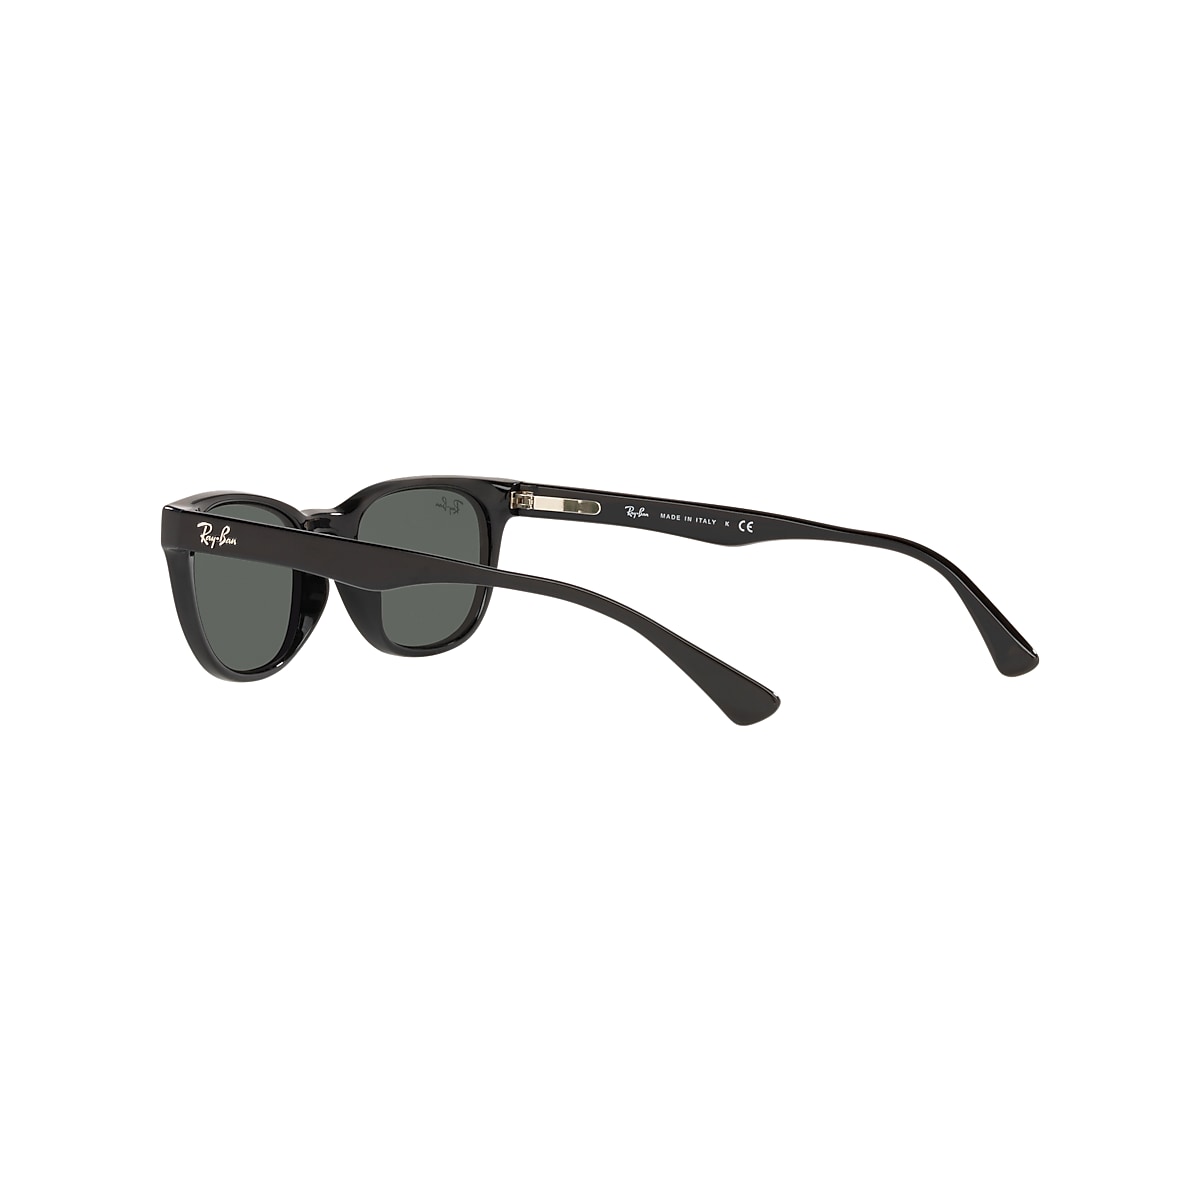 Rb4140 Sunglasses in Black and Green | Ray-Ban®